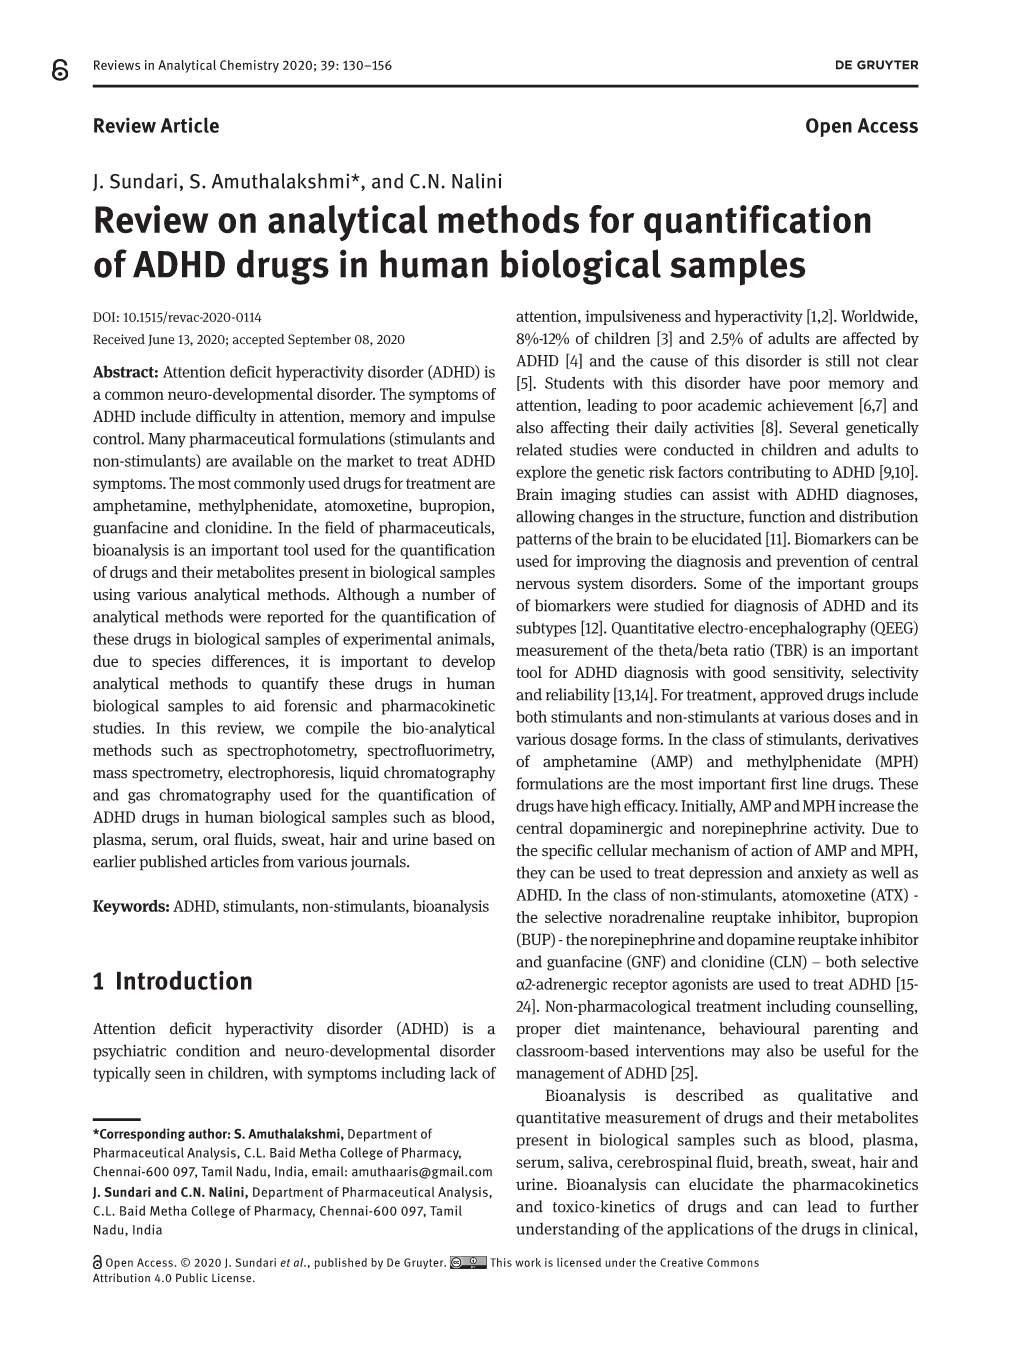 Review on Analytical Methods for Quantification of ADHD Drugs in Human Biological Samples